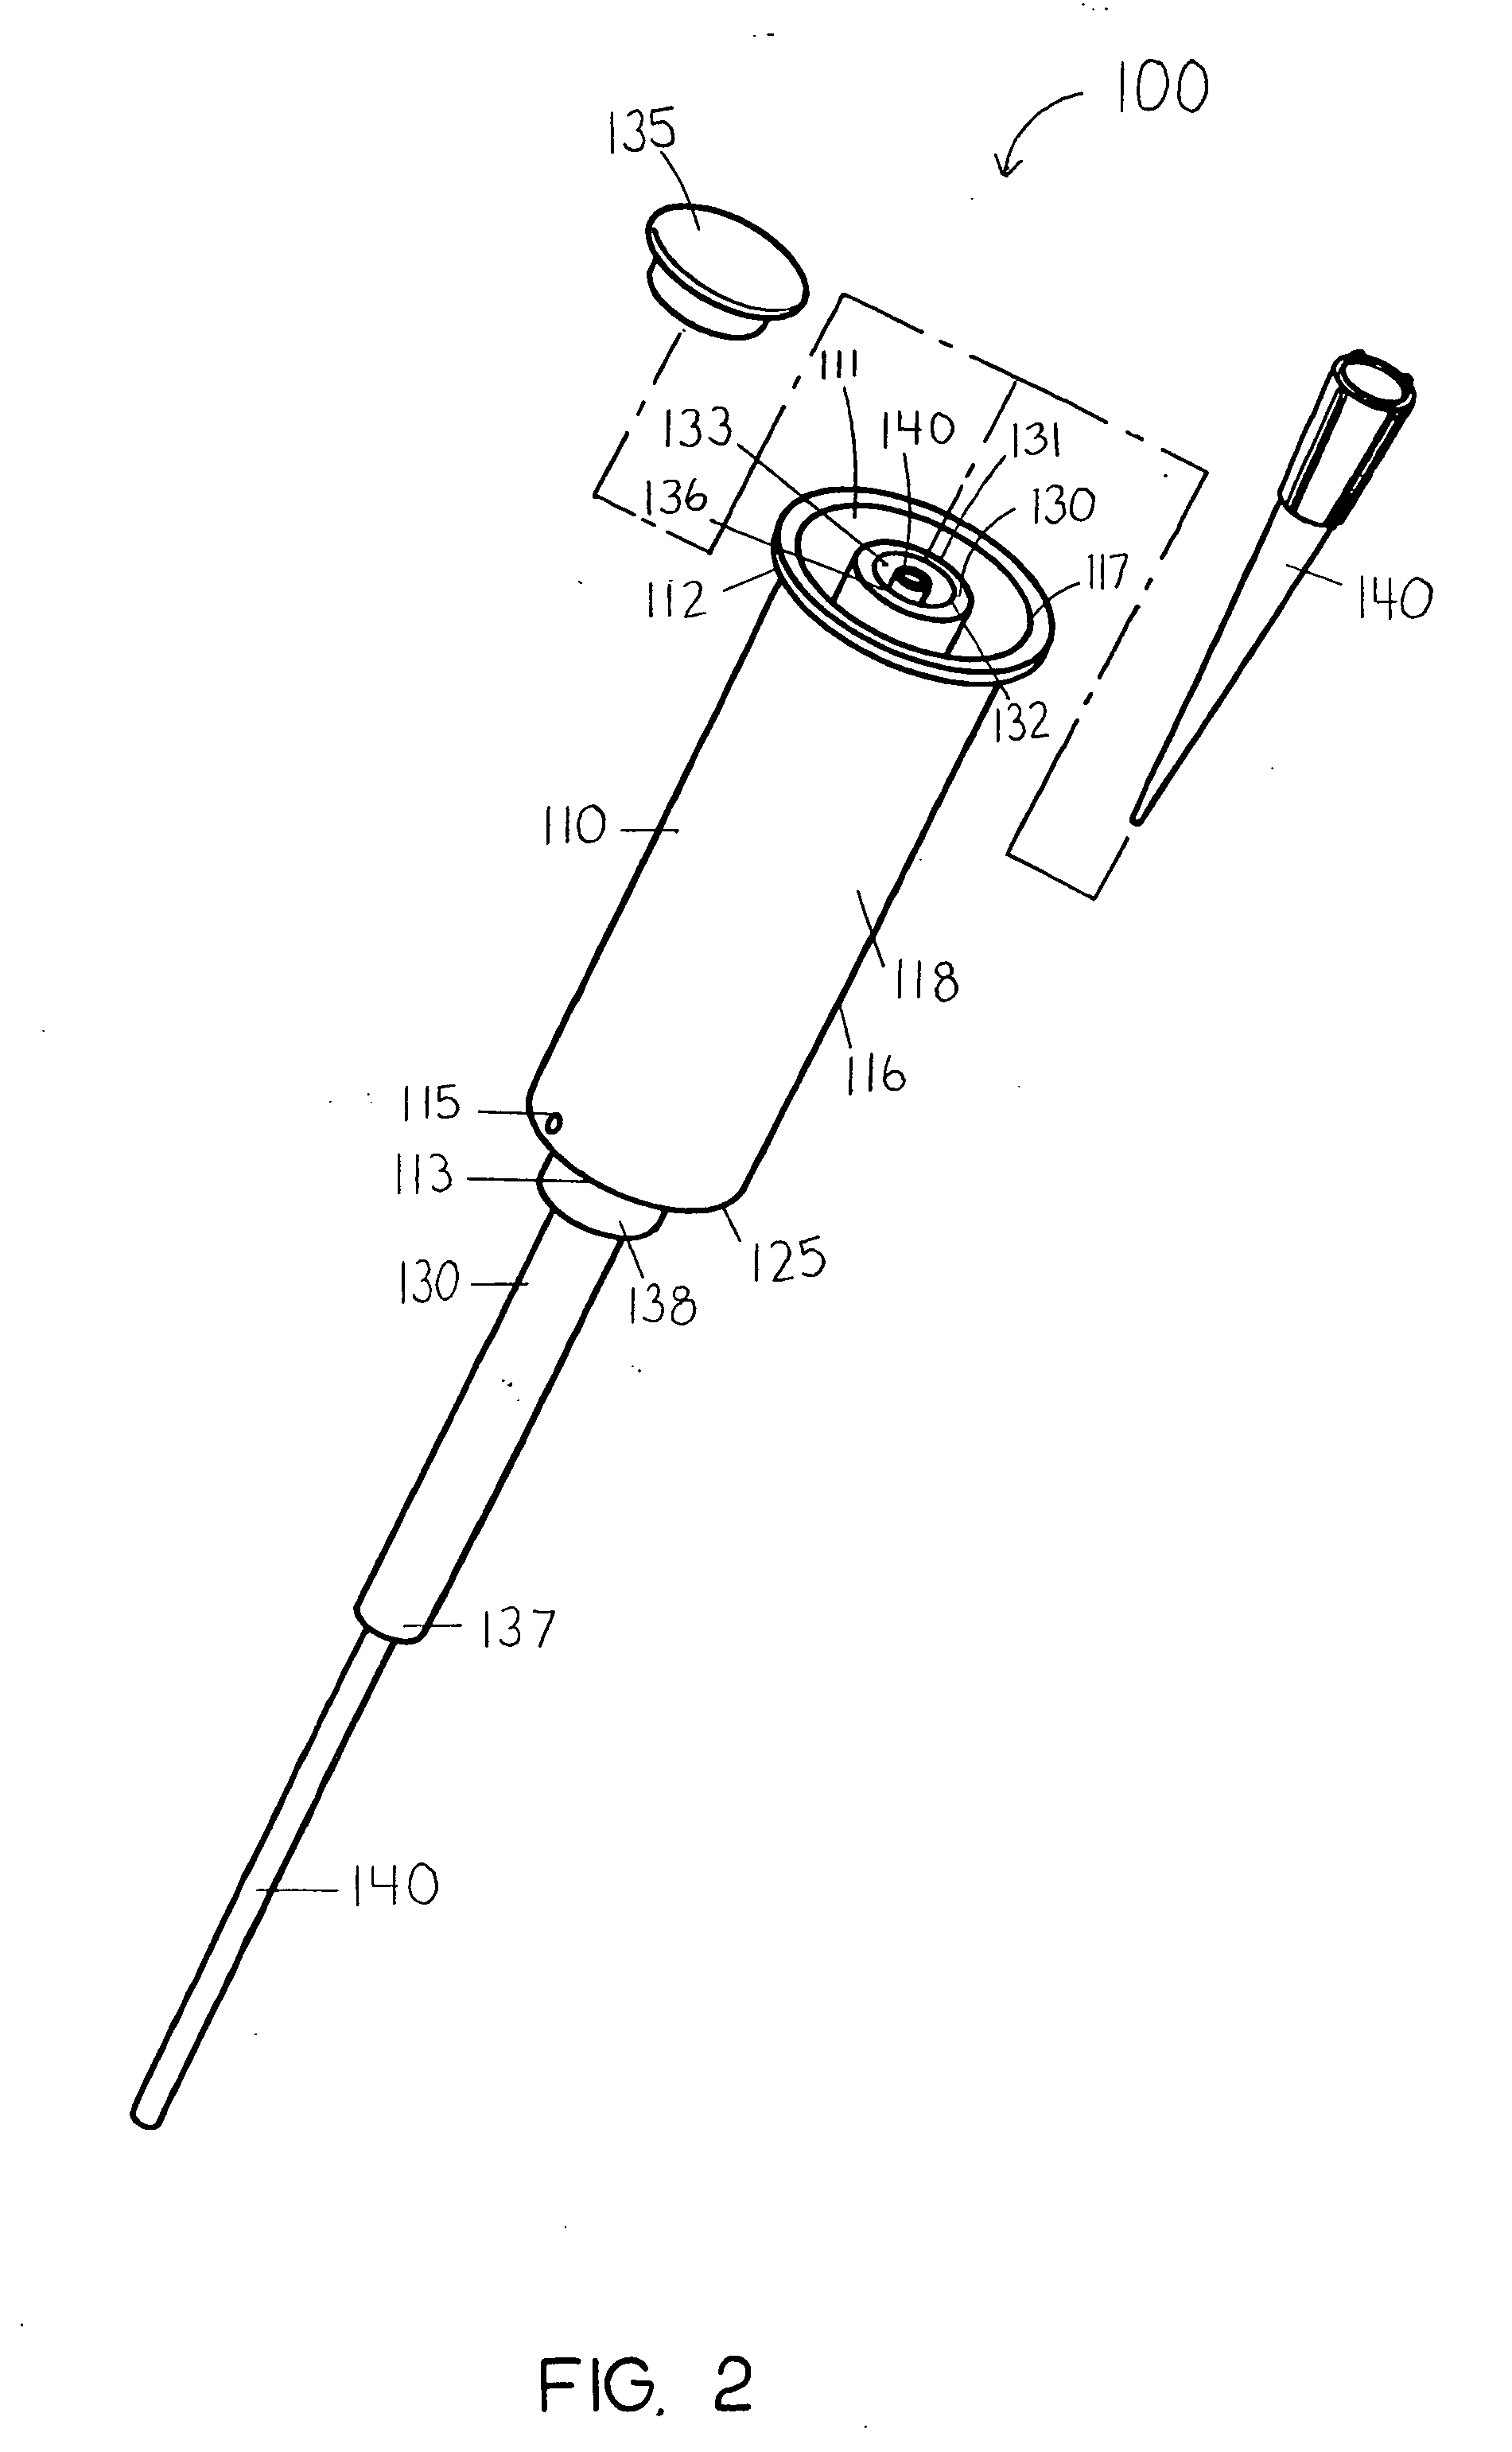 Apparatus and process for reducing pathogens in a biological sample and removing a sample pellet from a sample tube